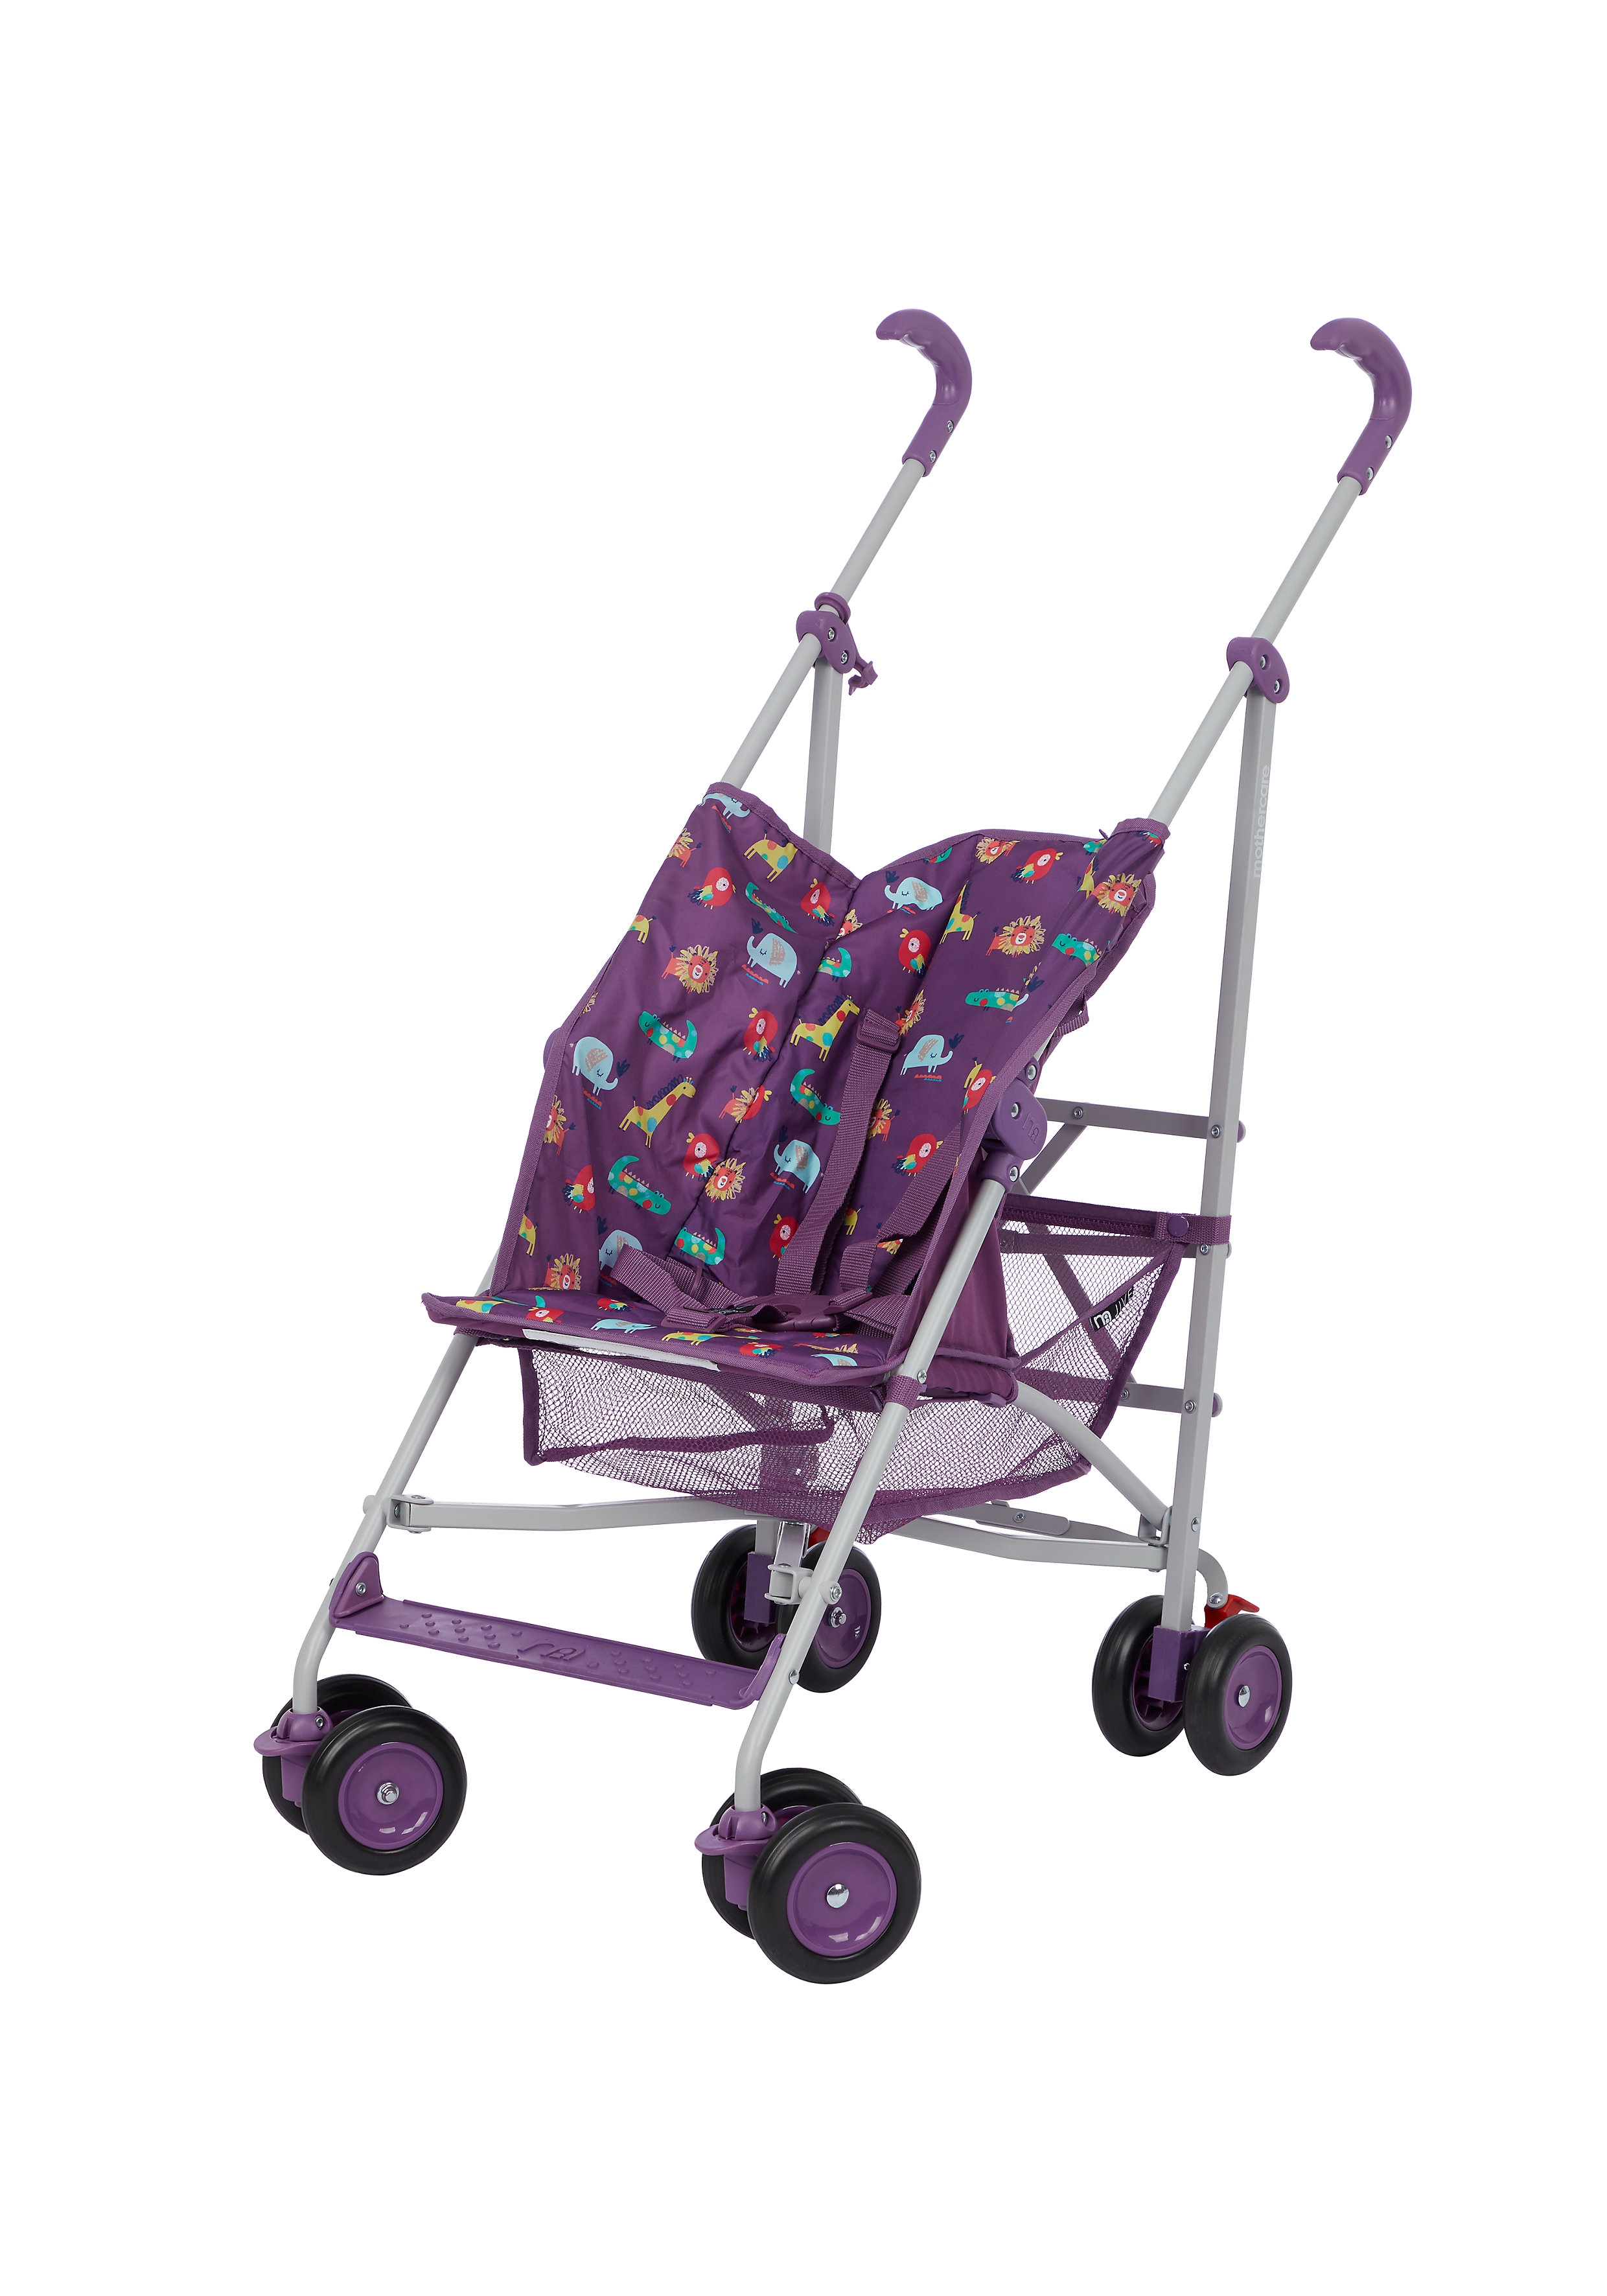 Mothercare | Mothercare Pushchair Baby Stroller Animal Kingdom 